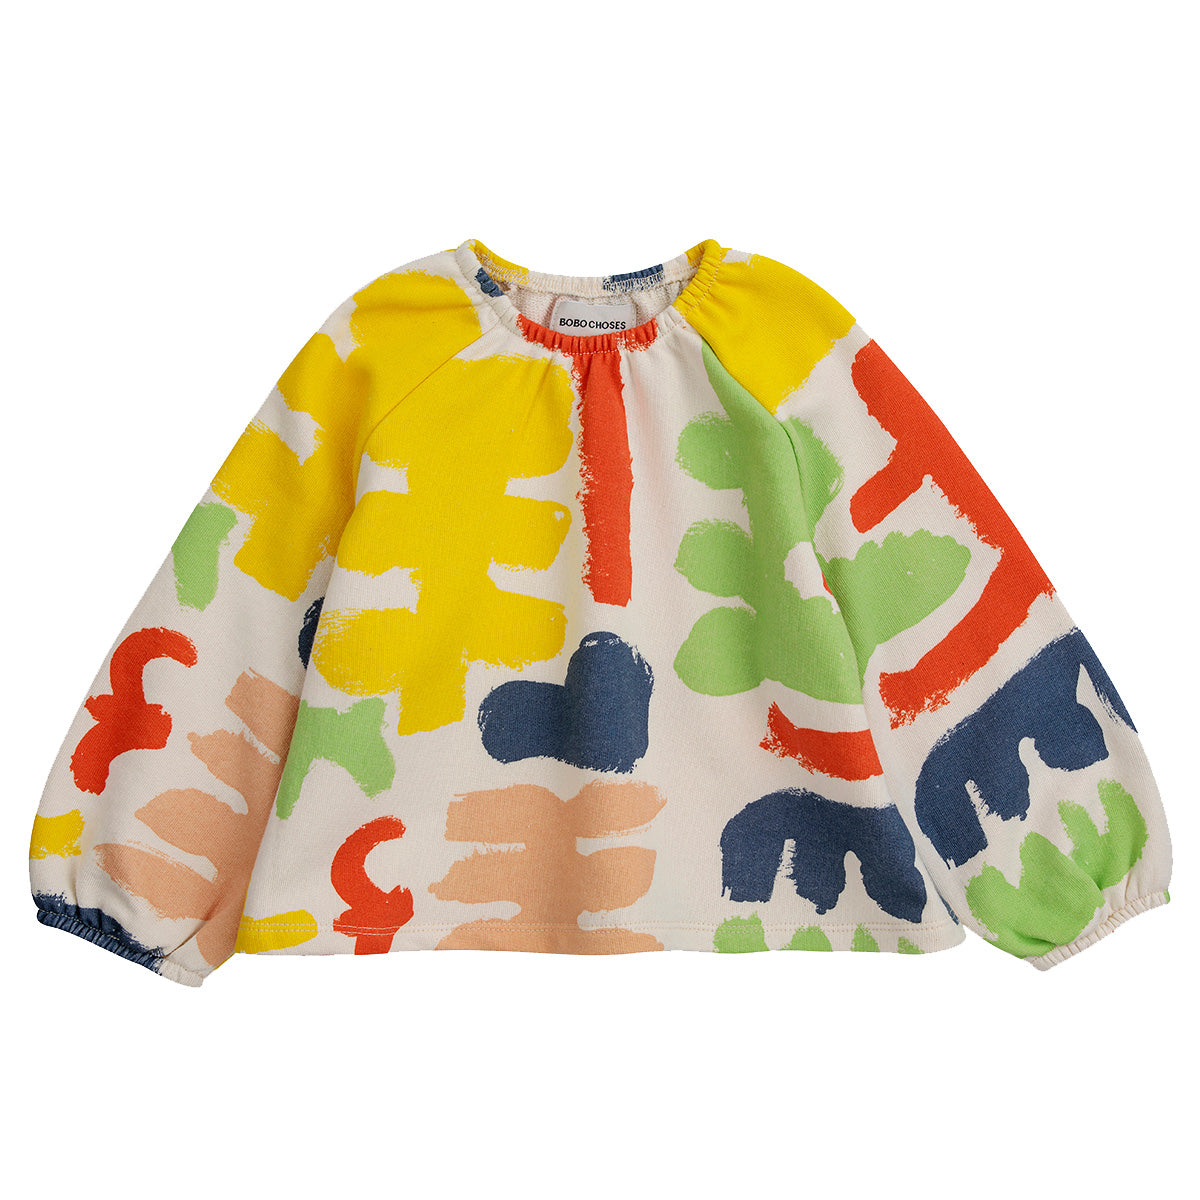 The Baby Carnival All Over Sweatshirt from Bobo Choses. Designed with long sleeves, raglan sleeves